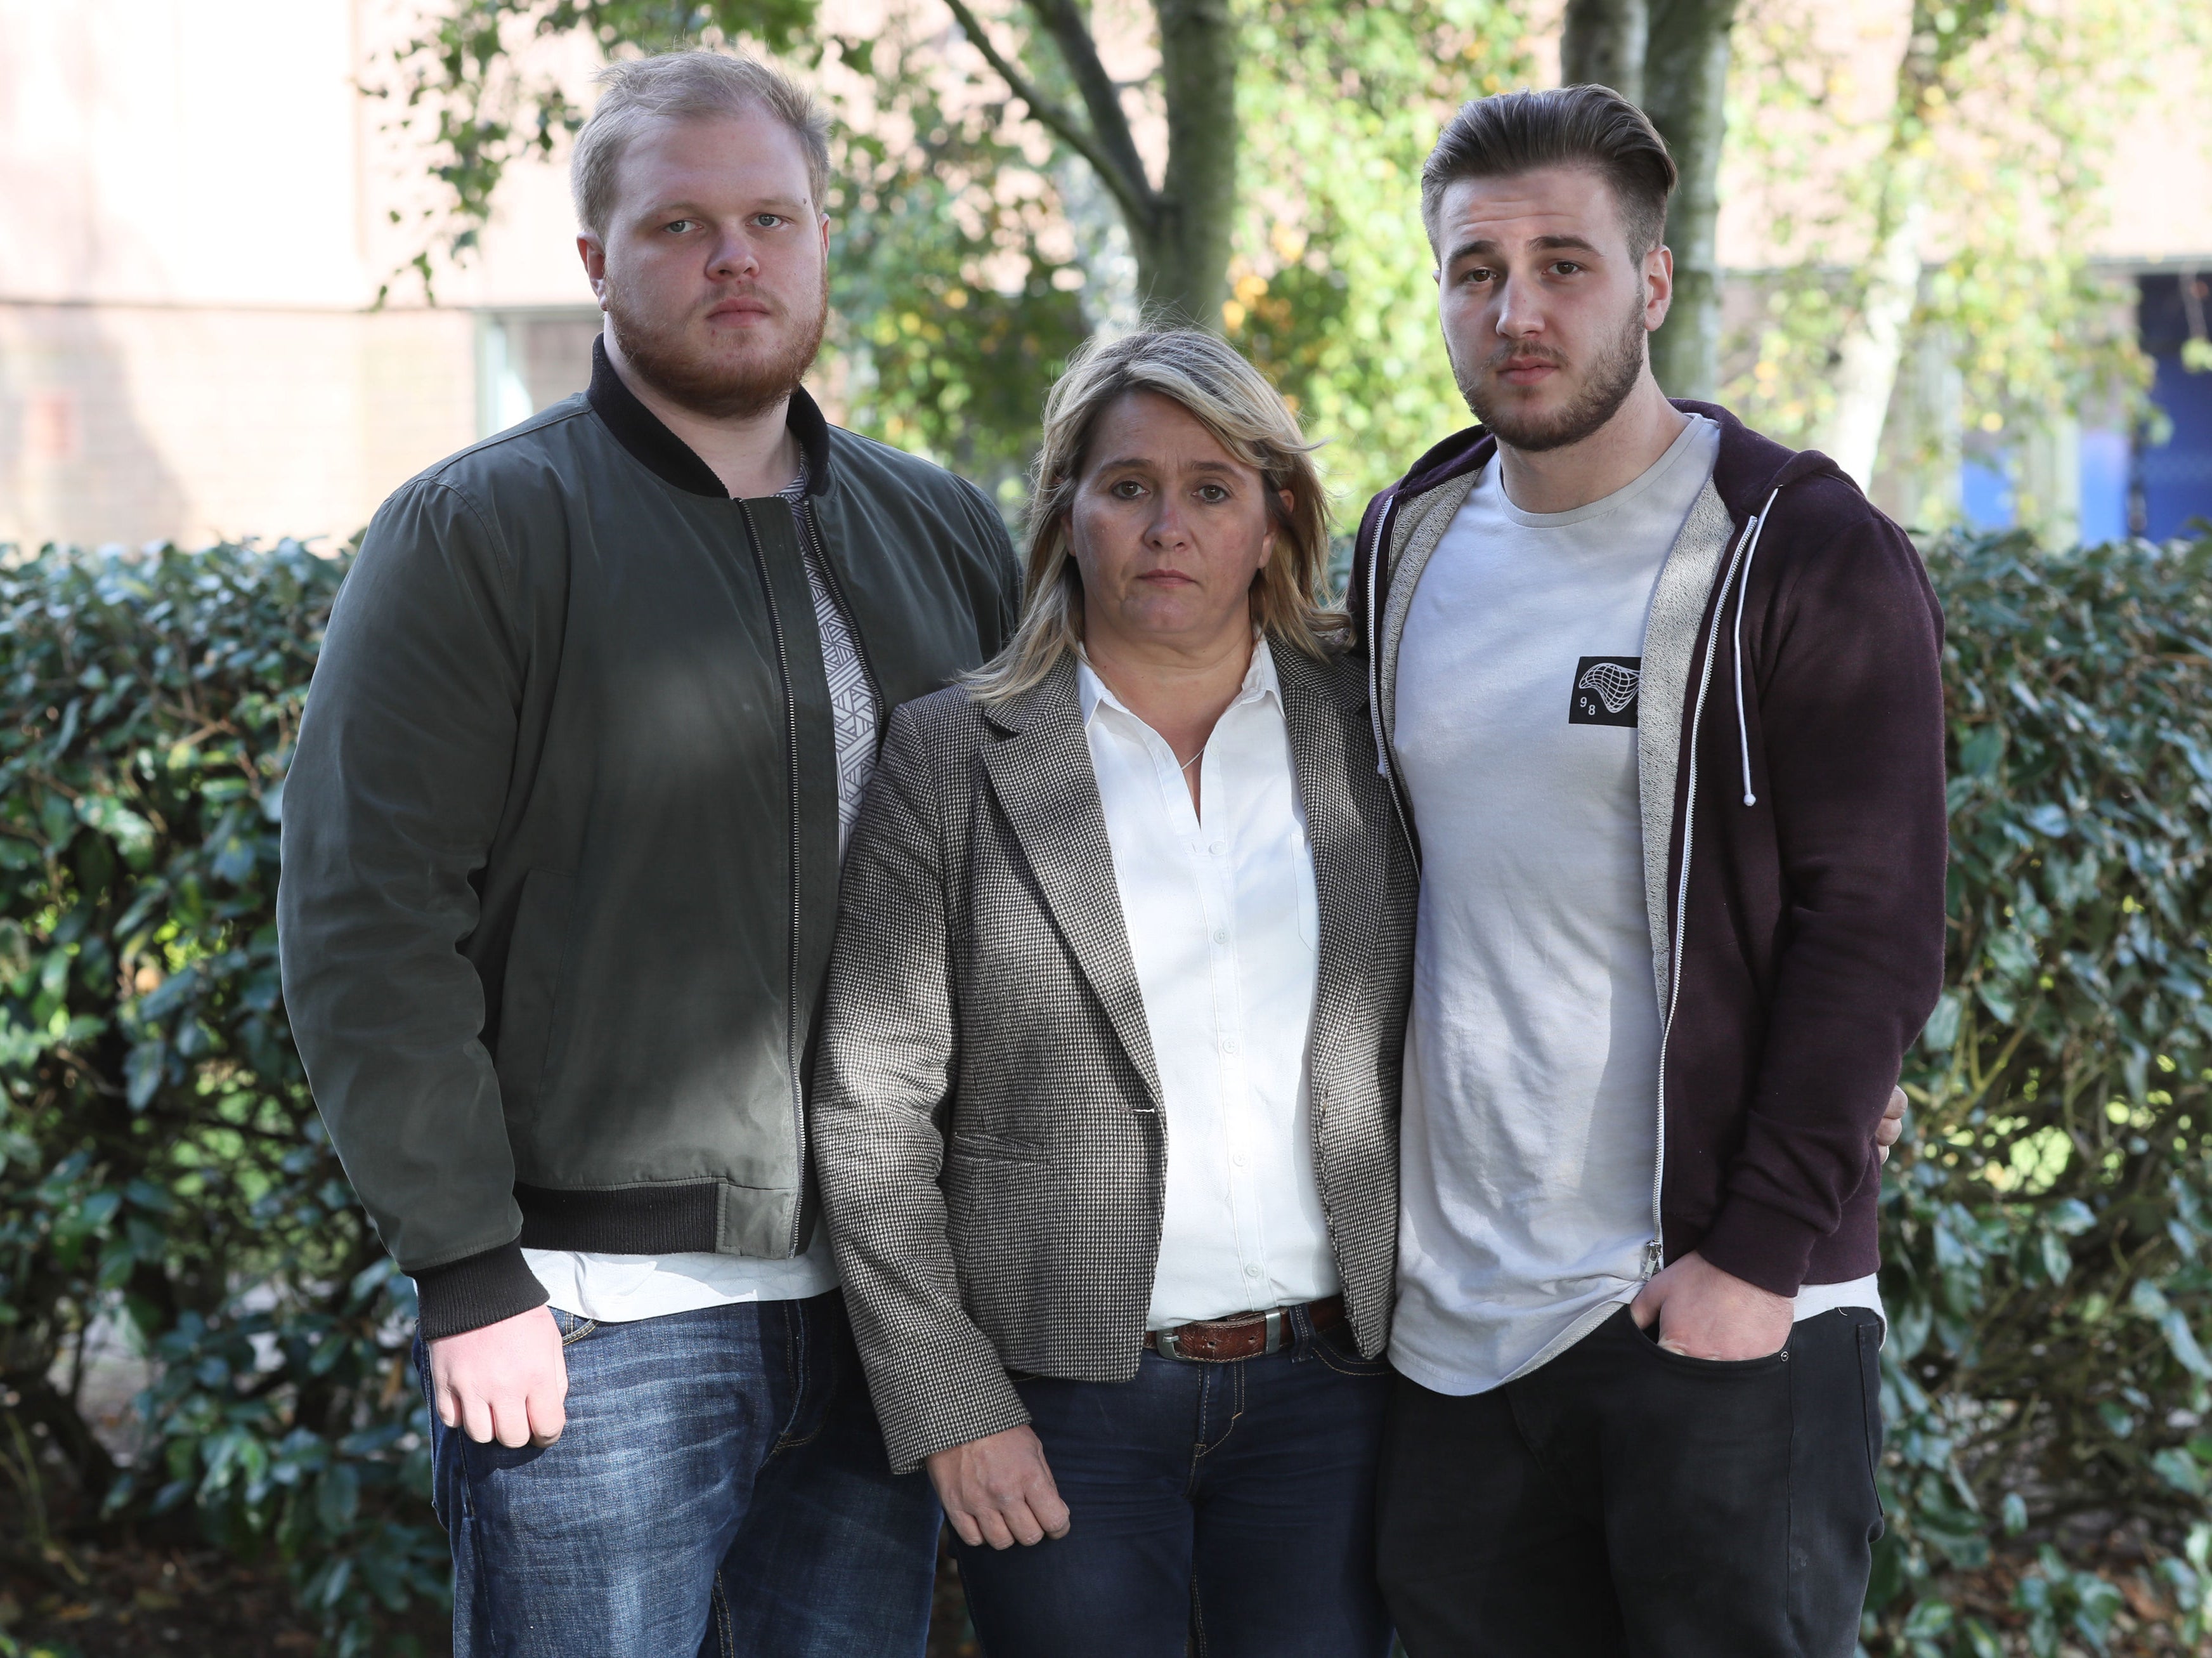 Nicola Urquhart, mother of missing 23-year-old RAF gunner Corrie McKeague, pictured with his brothers Darroch (right) and Makeyan (left) at Sufolk Police head quarters in 2016